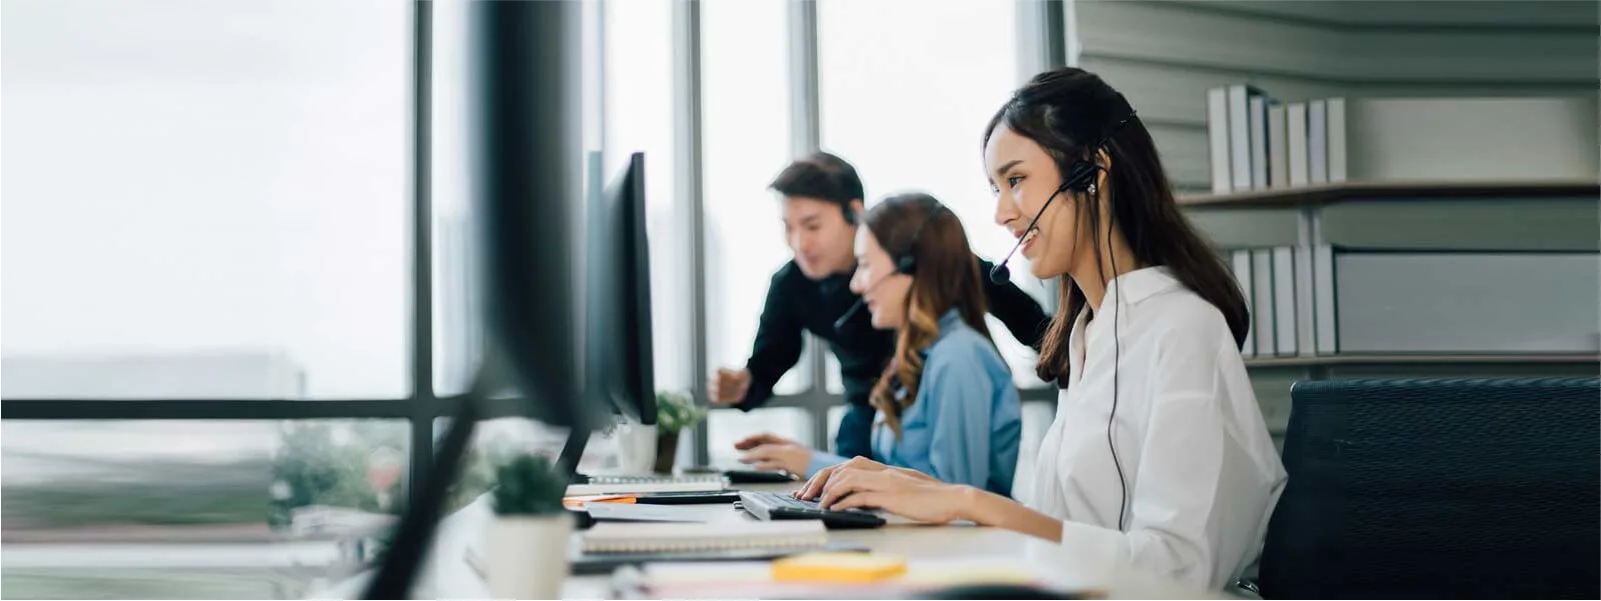 contact center trends